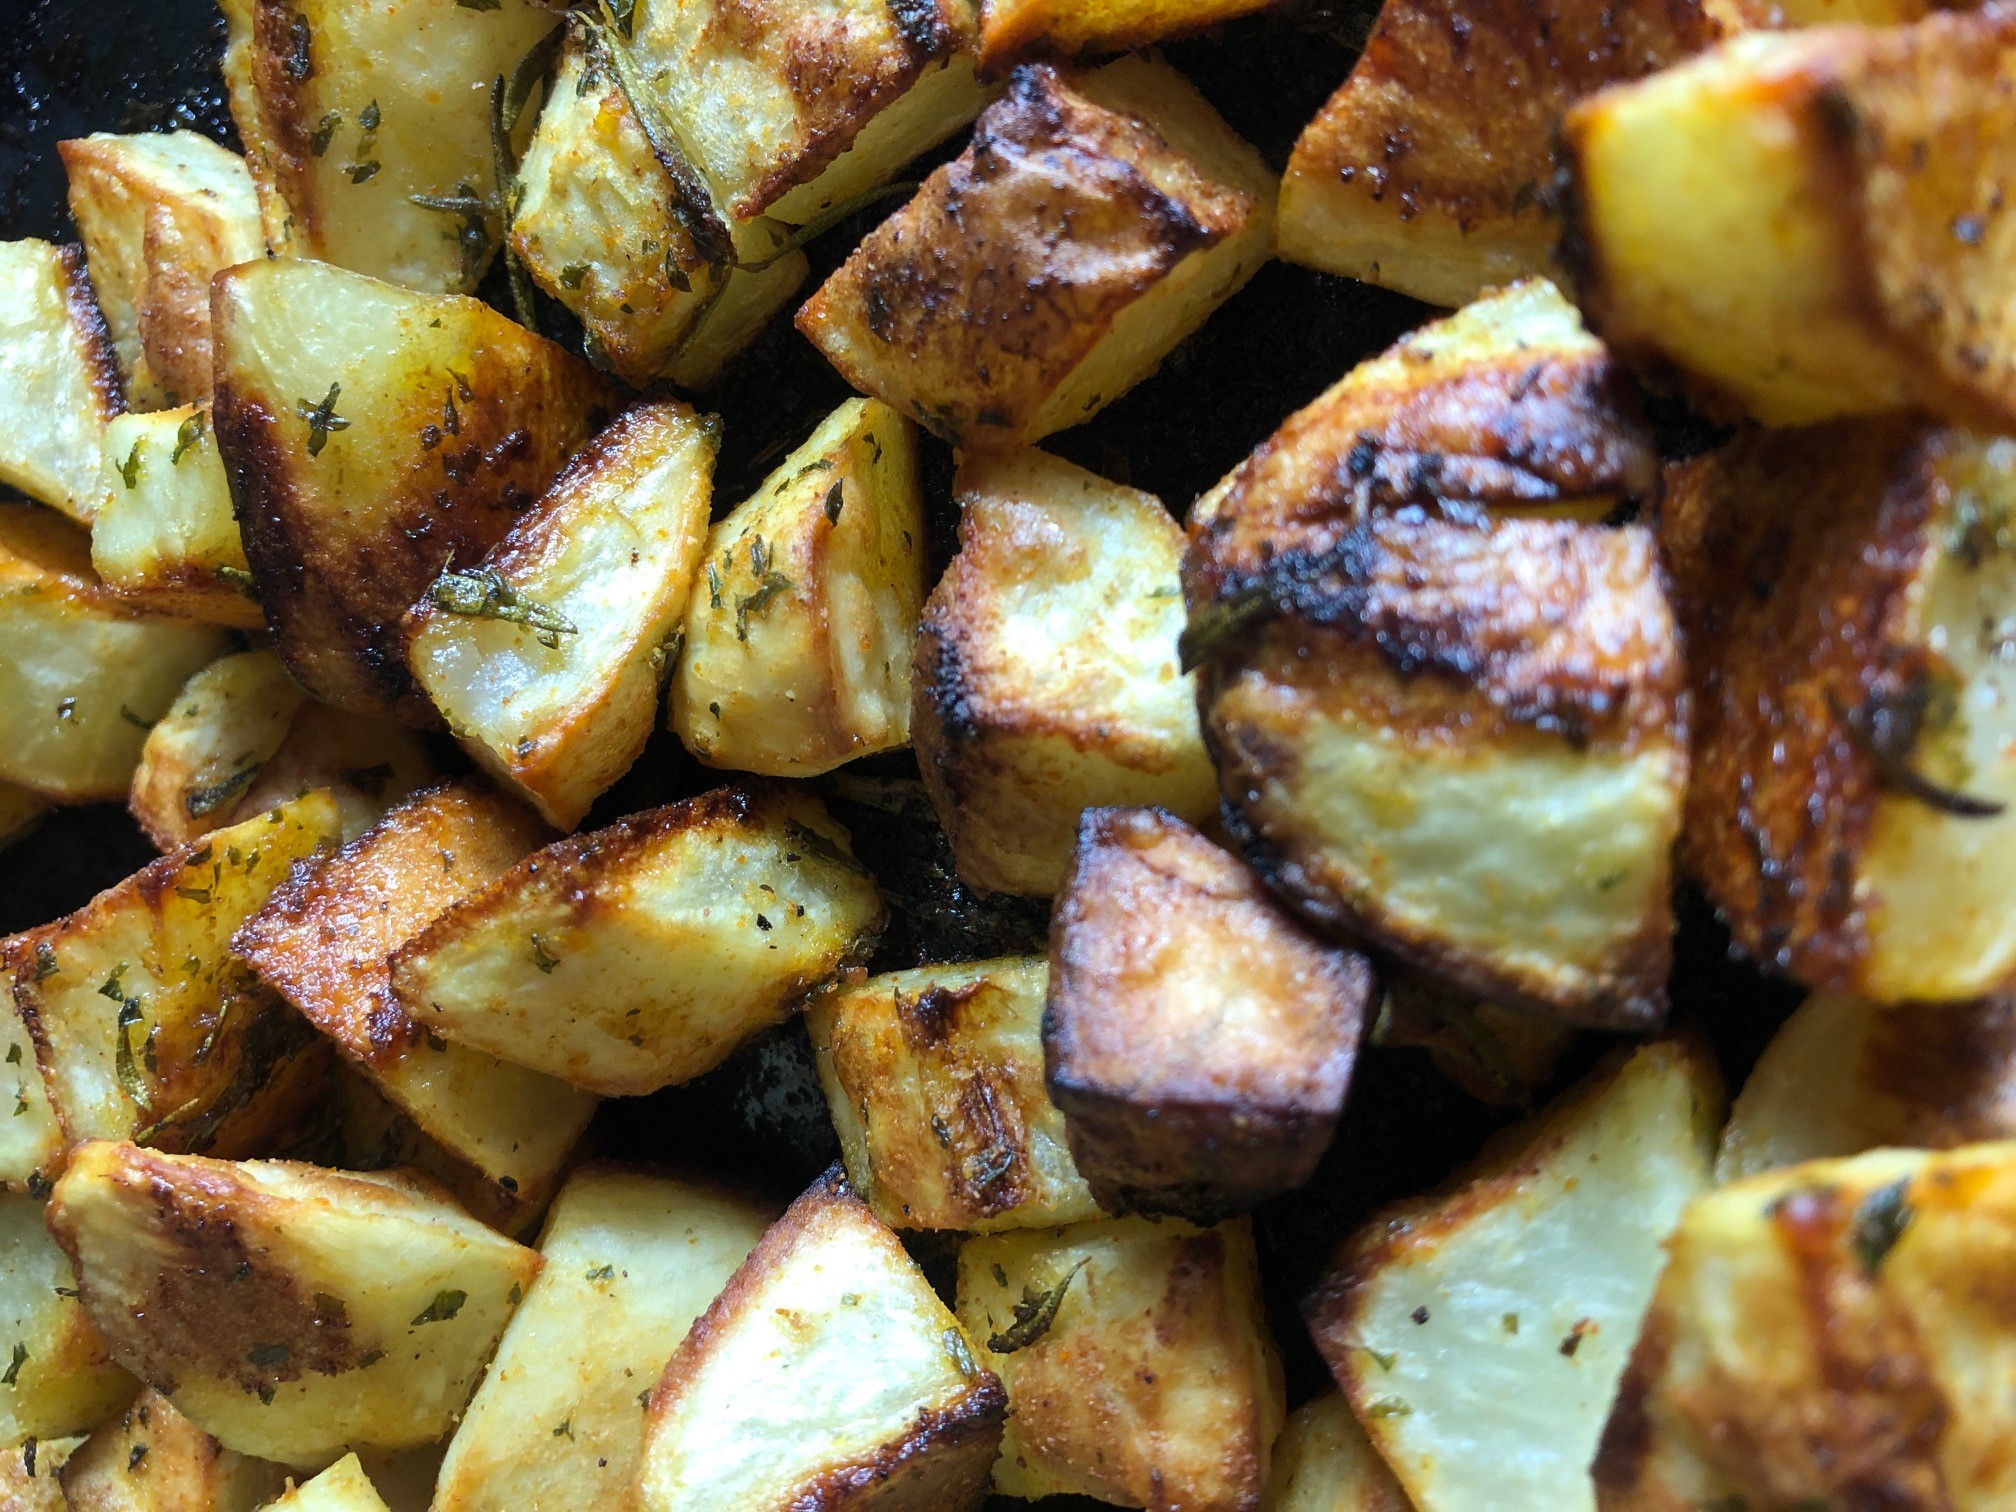 Oven roasted potatoes seasoned with olive oil, salt, pepper, cayenne, garlic powder, and rosemary.